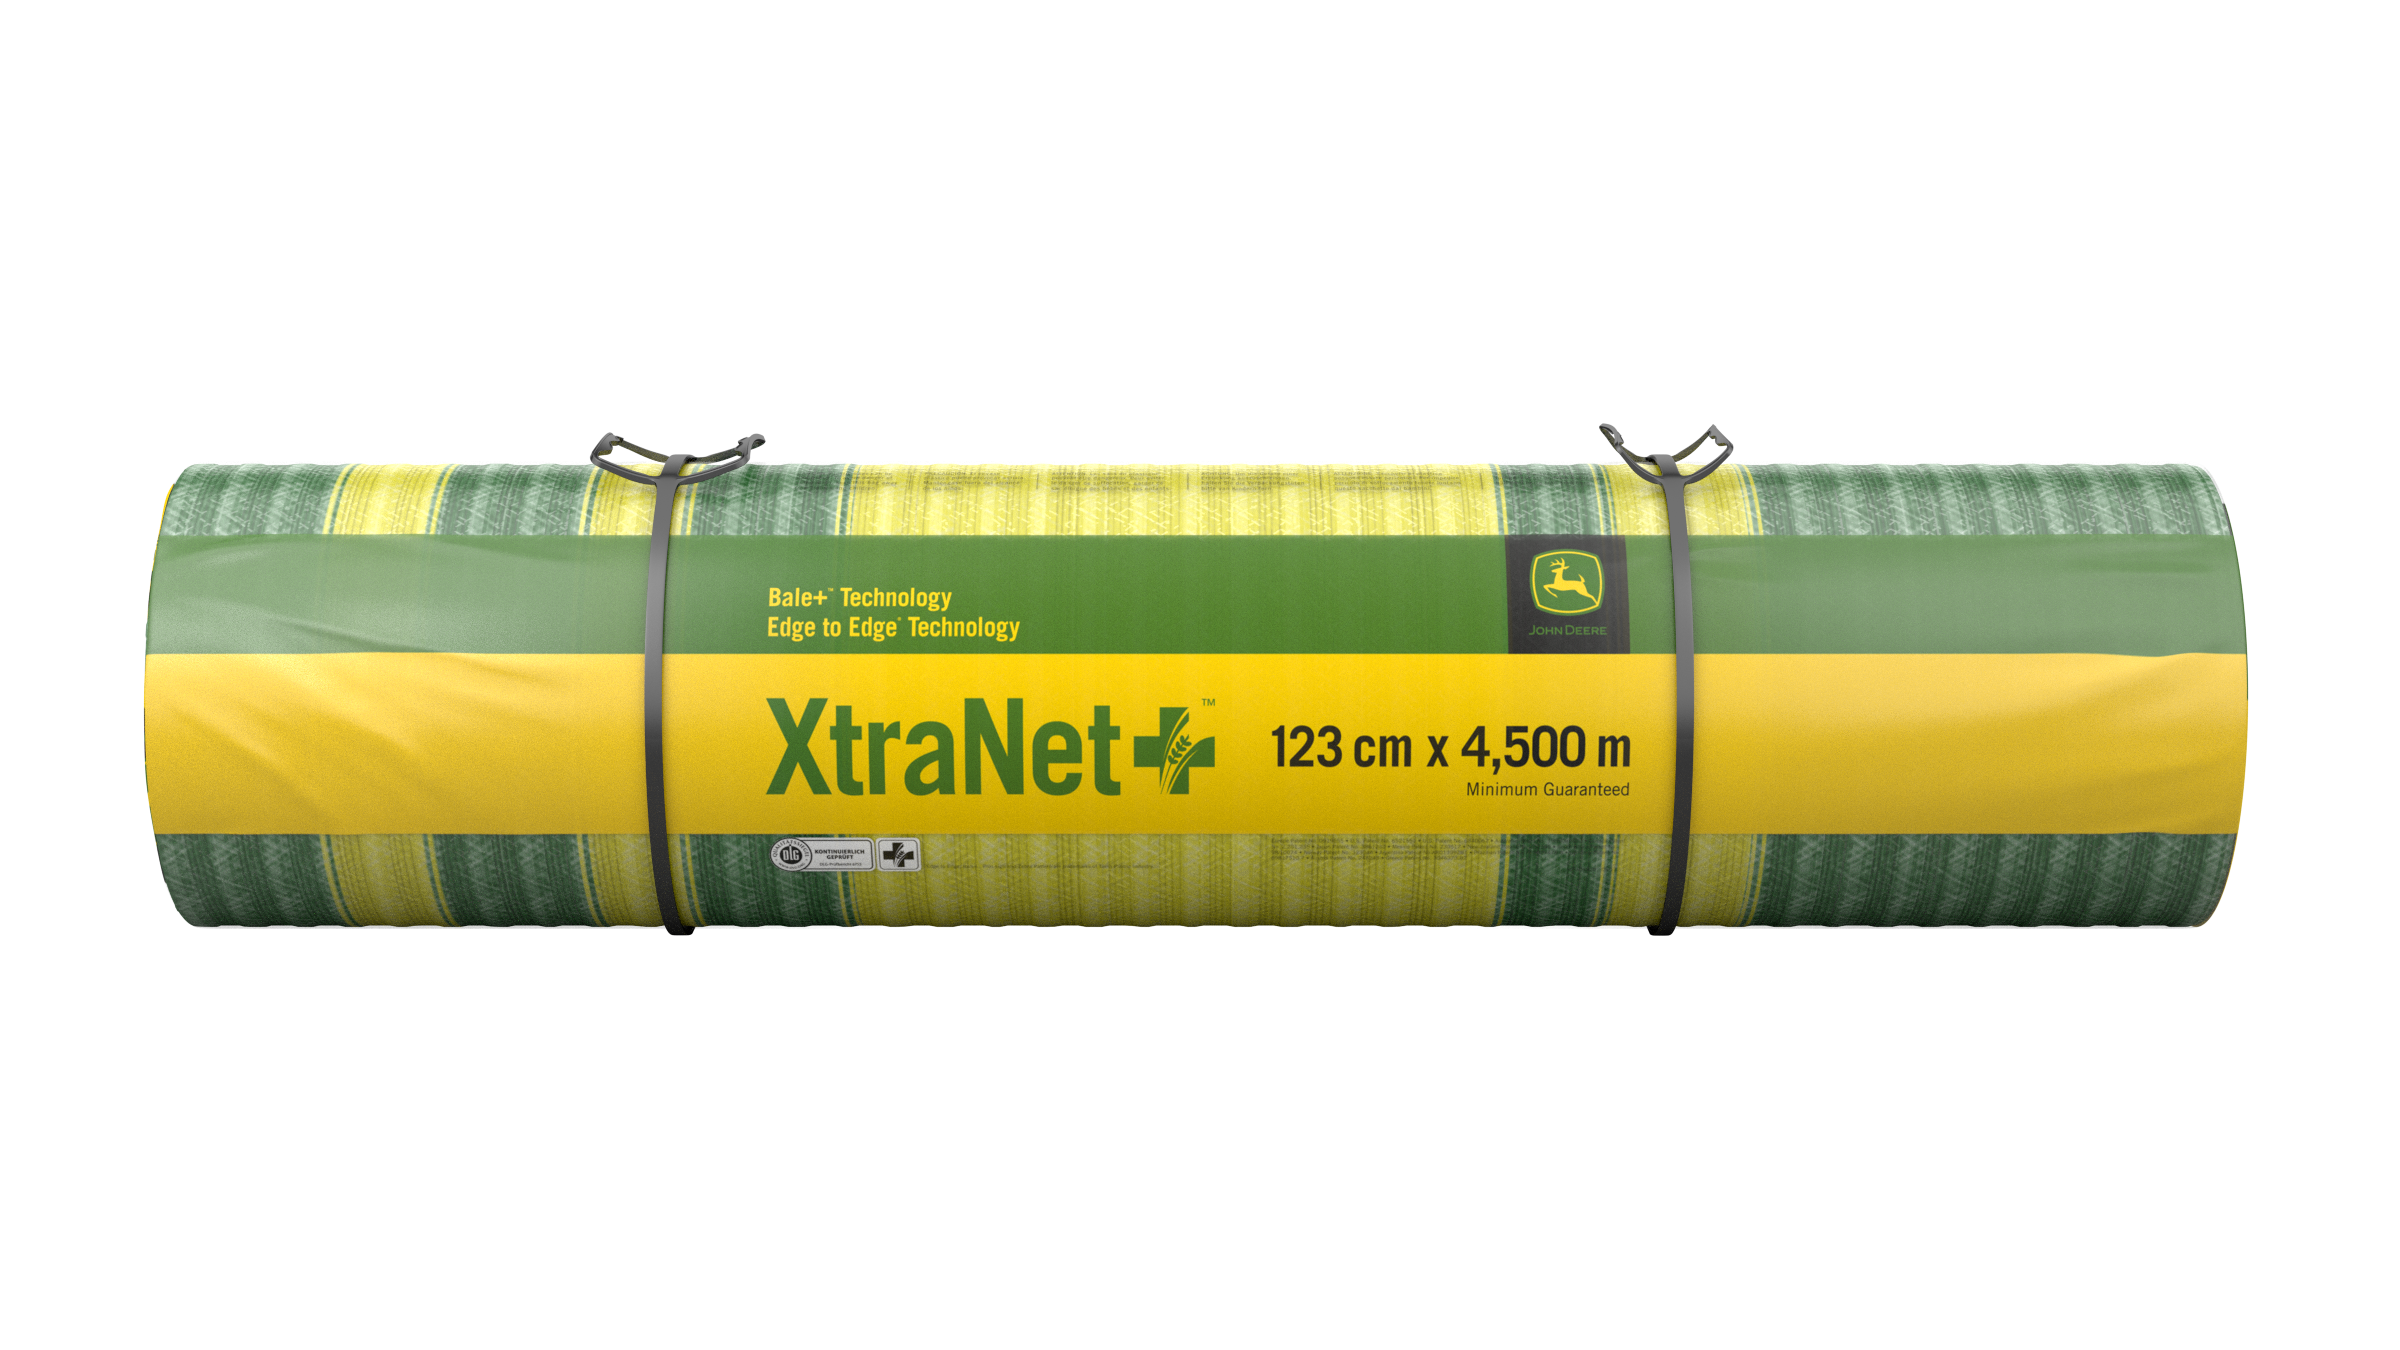 XtraNet 123 centimeter by 4500 meter roll with a white background